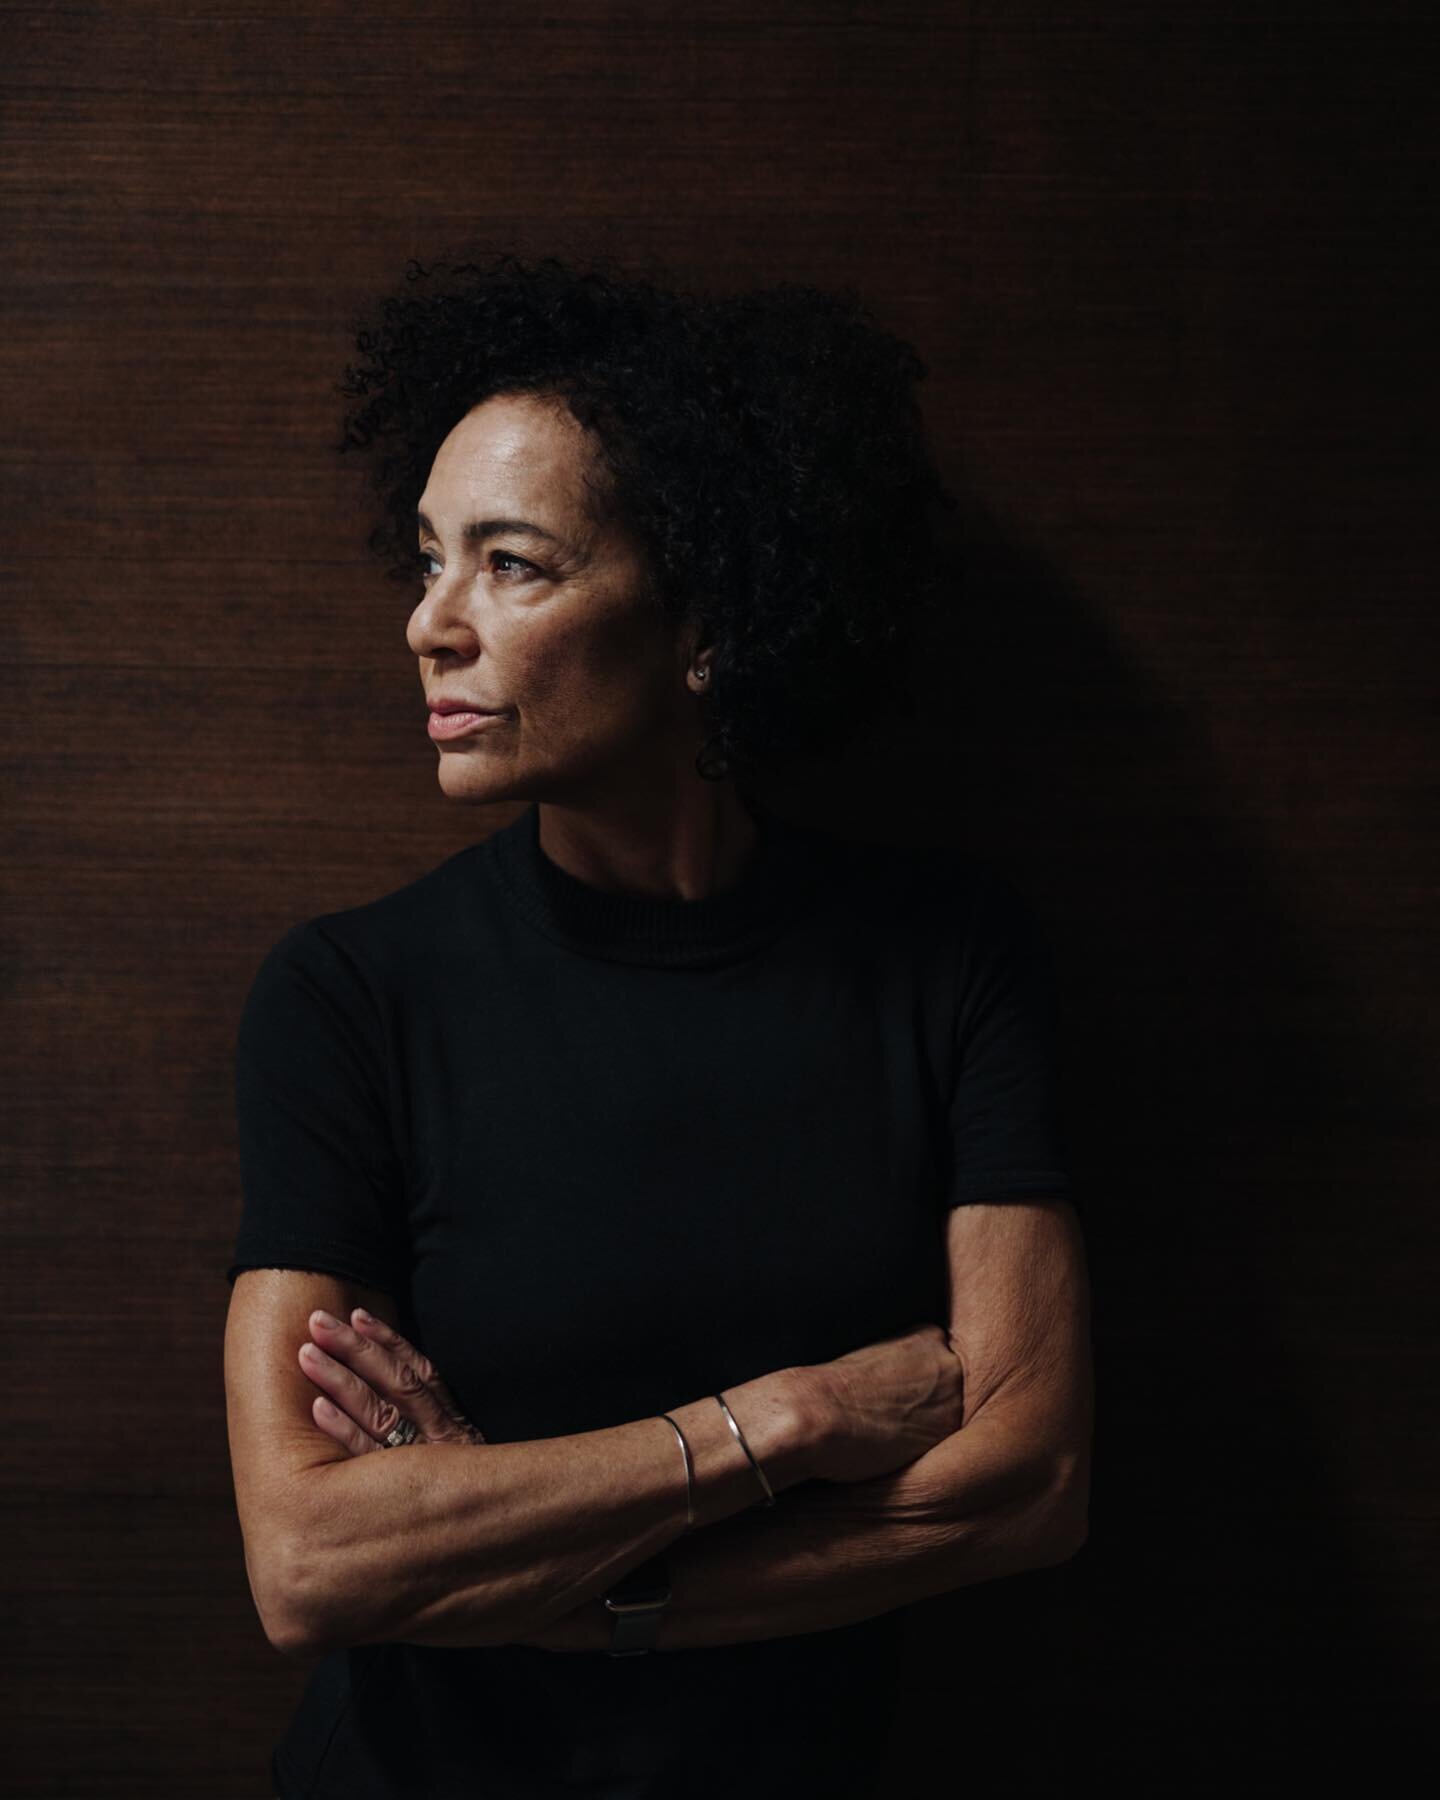 I am excited to watch the Oscars tonight. @StephanieAllain is producing the show and I had the honor of photographing her for the current issue of Produced By, the official magazine of The Producer&rsquo;s Guild of America.

Creative Director: @heyit